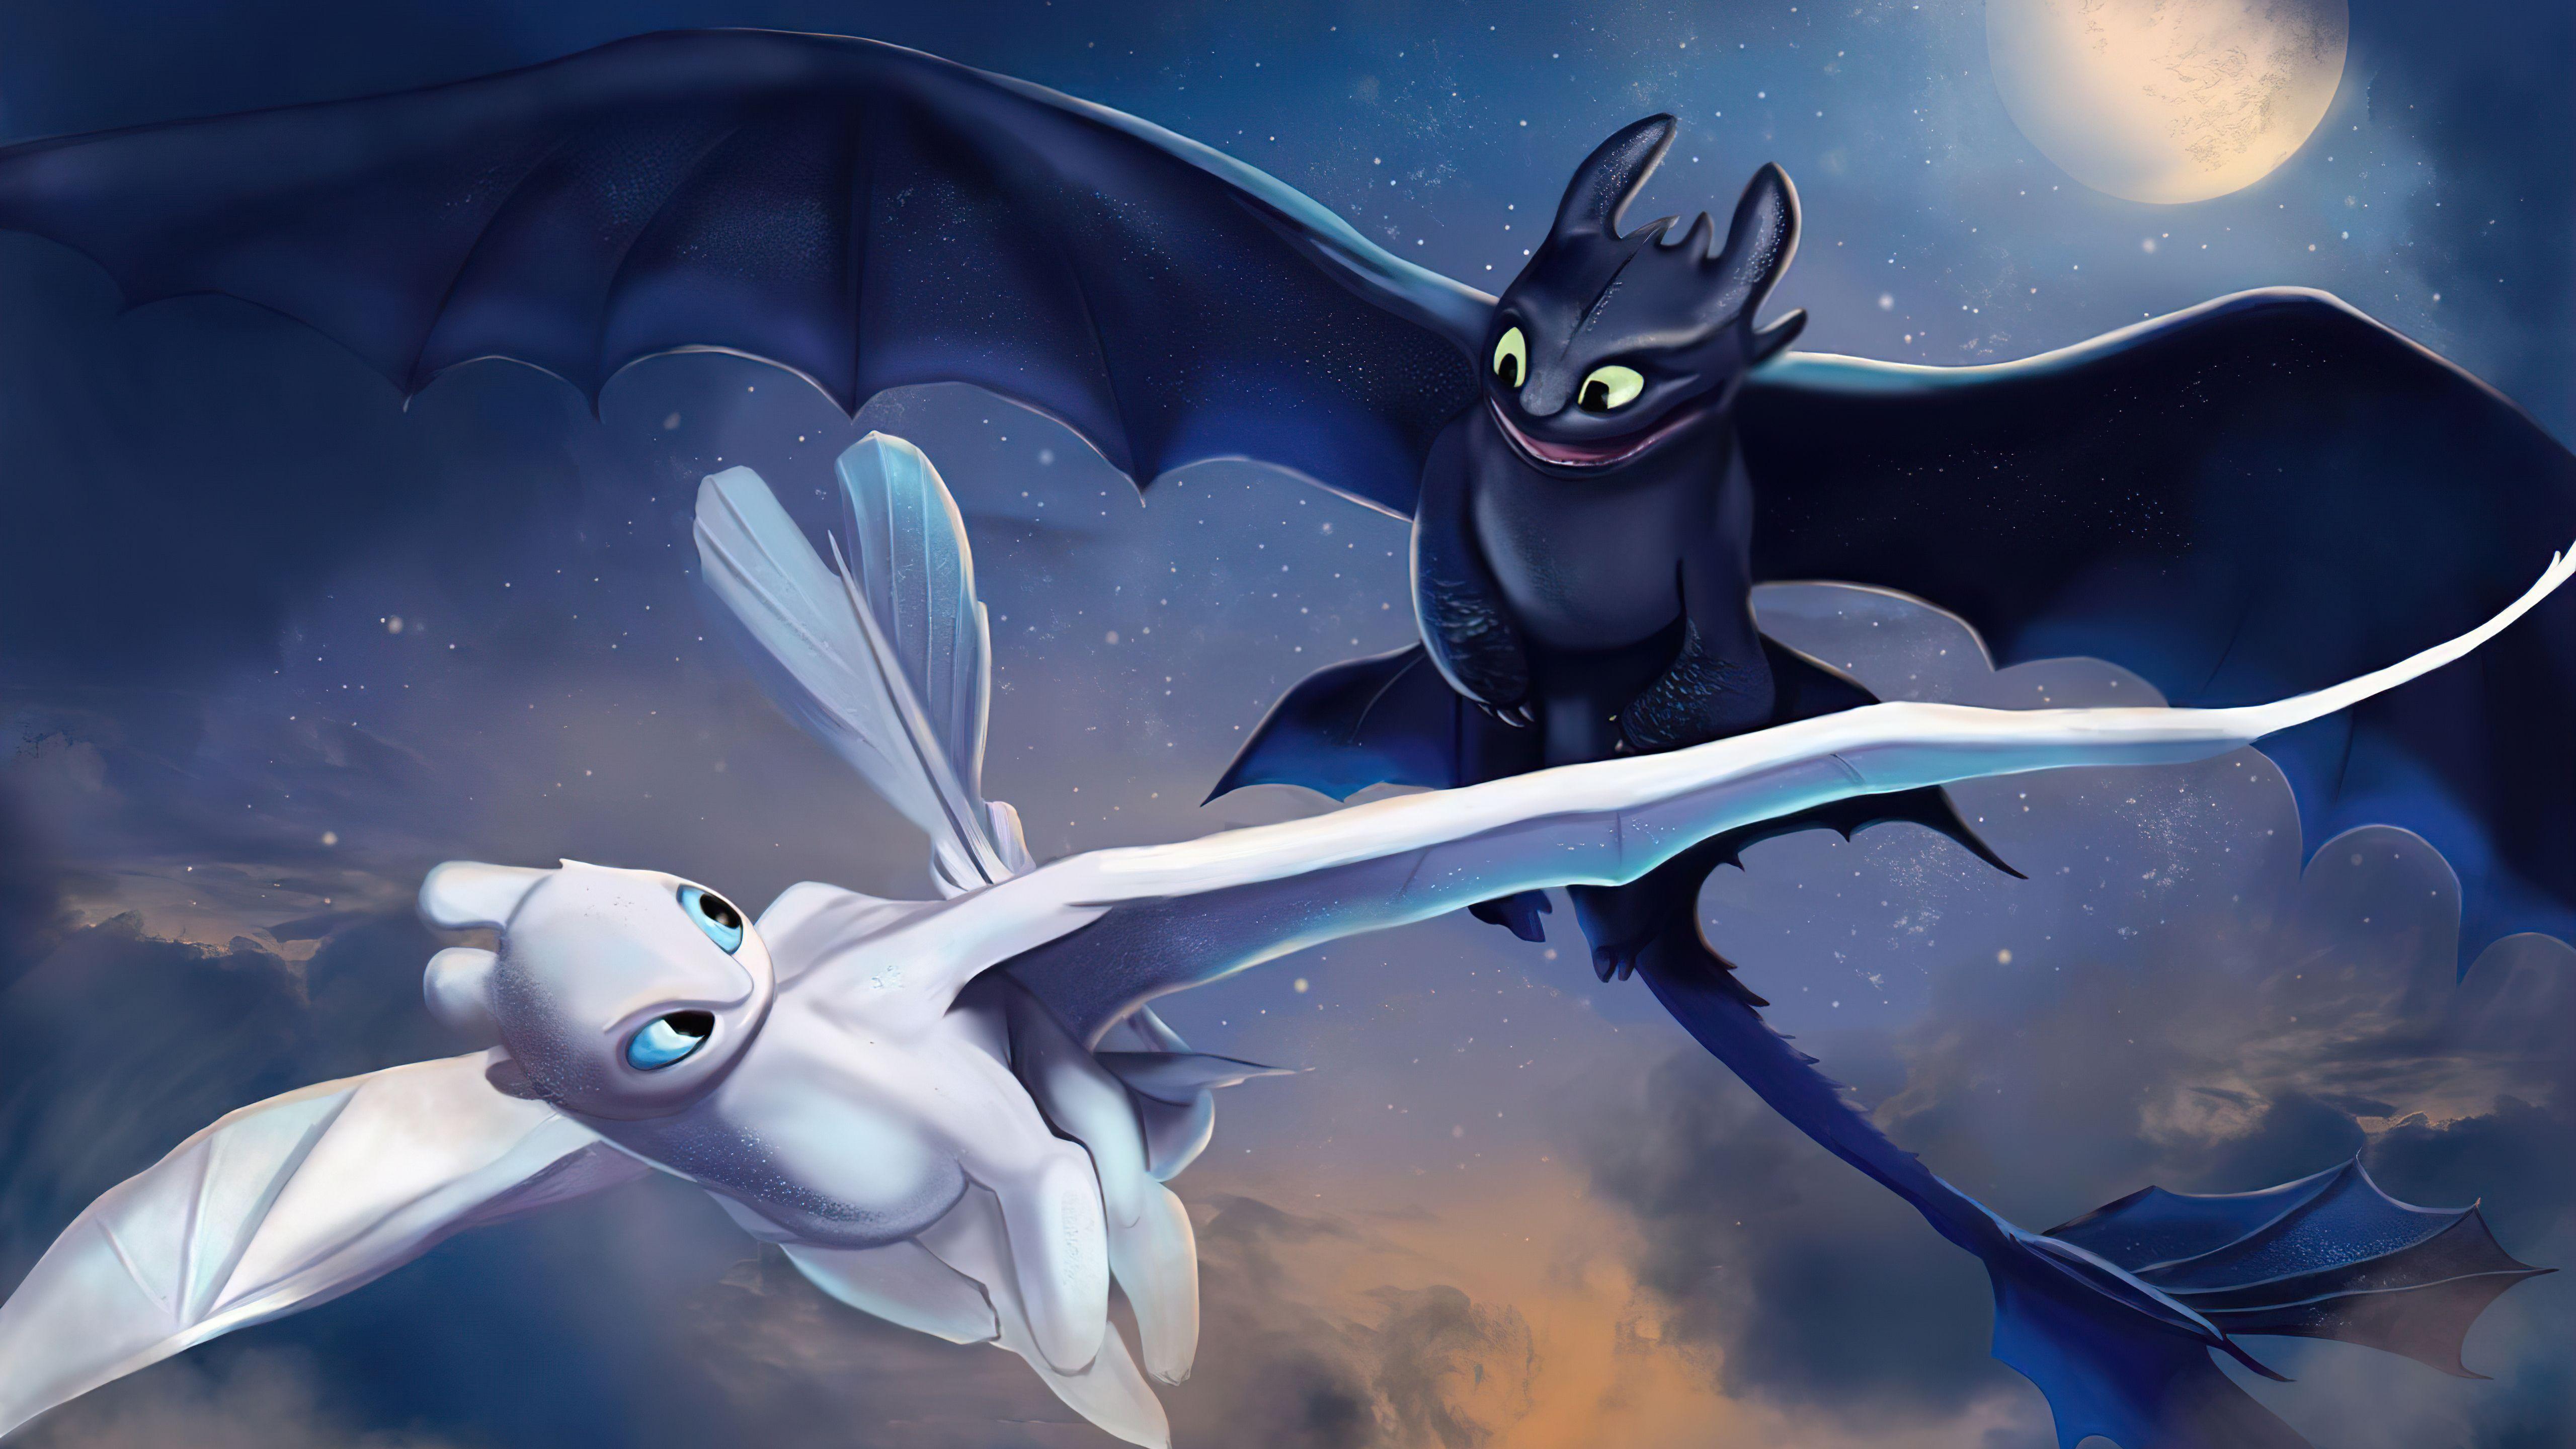 Toothless and Light Fury Wallpapers - Top Free Toothless and Light Fury